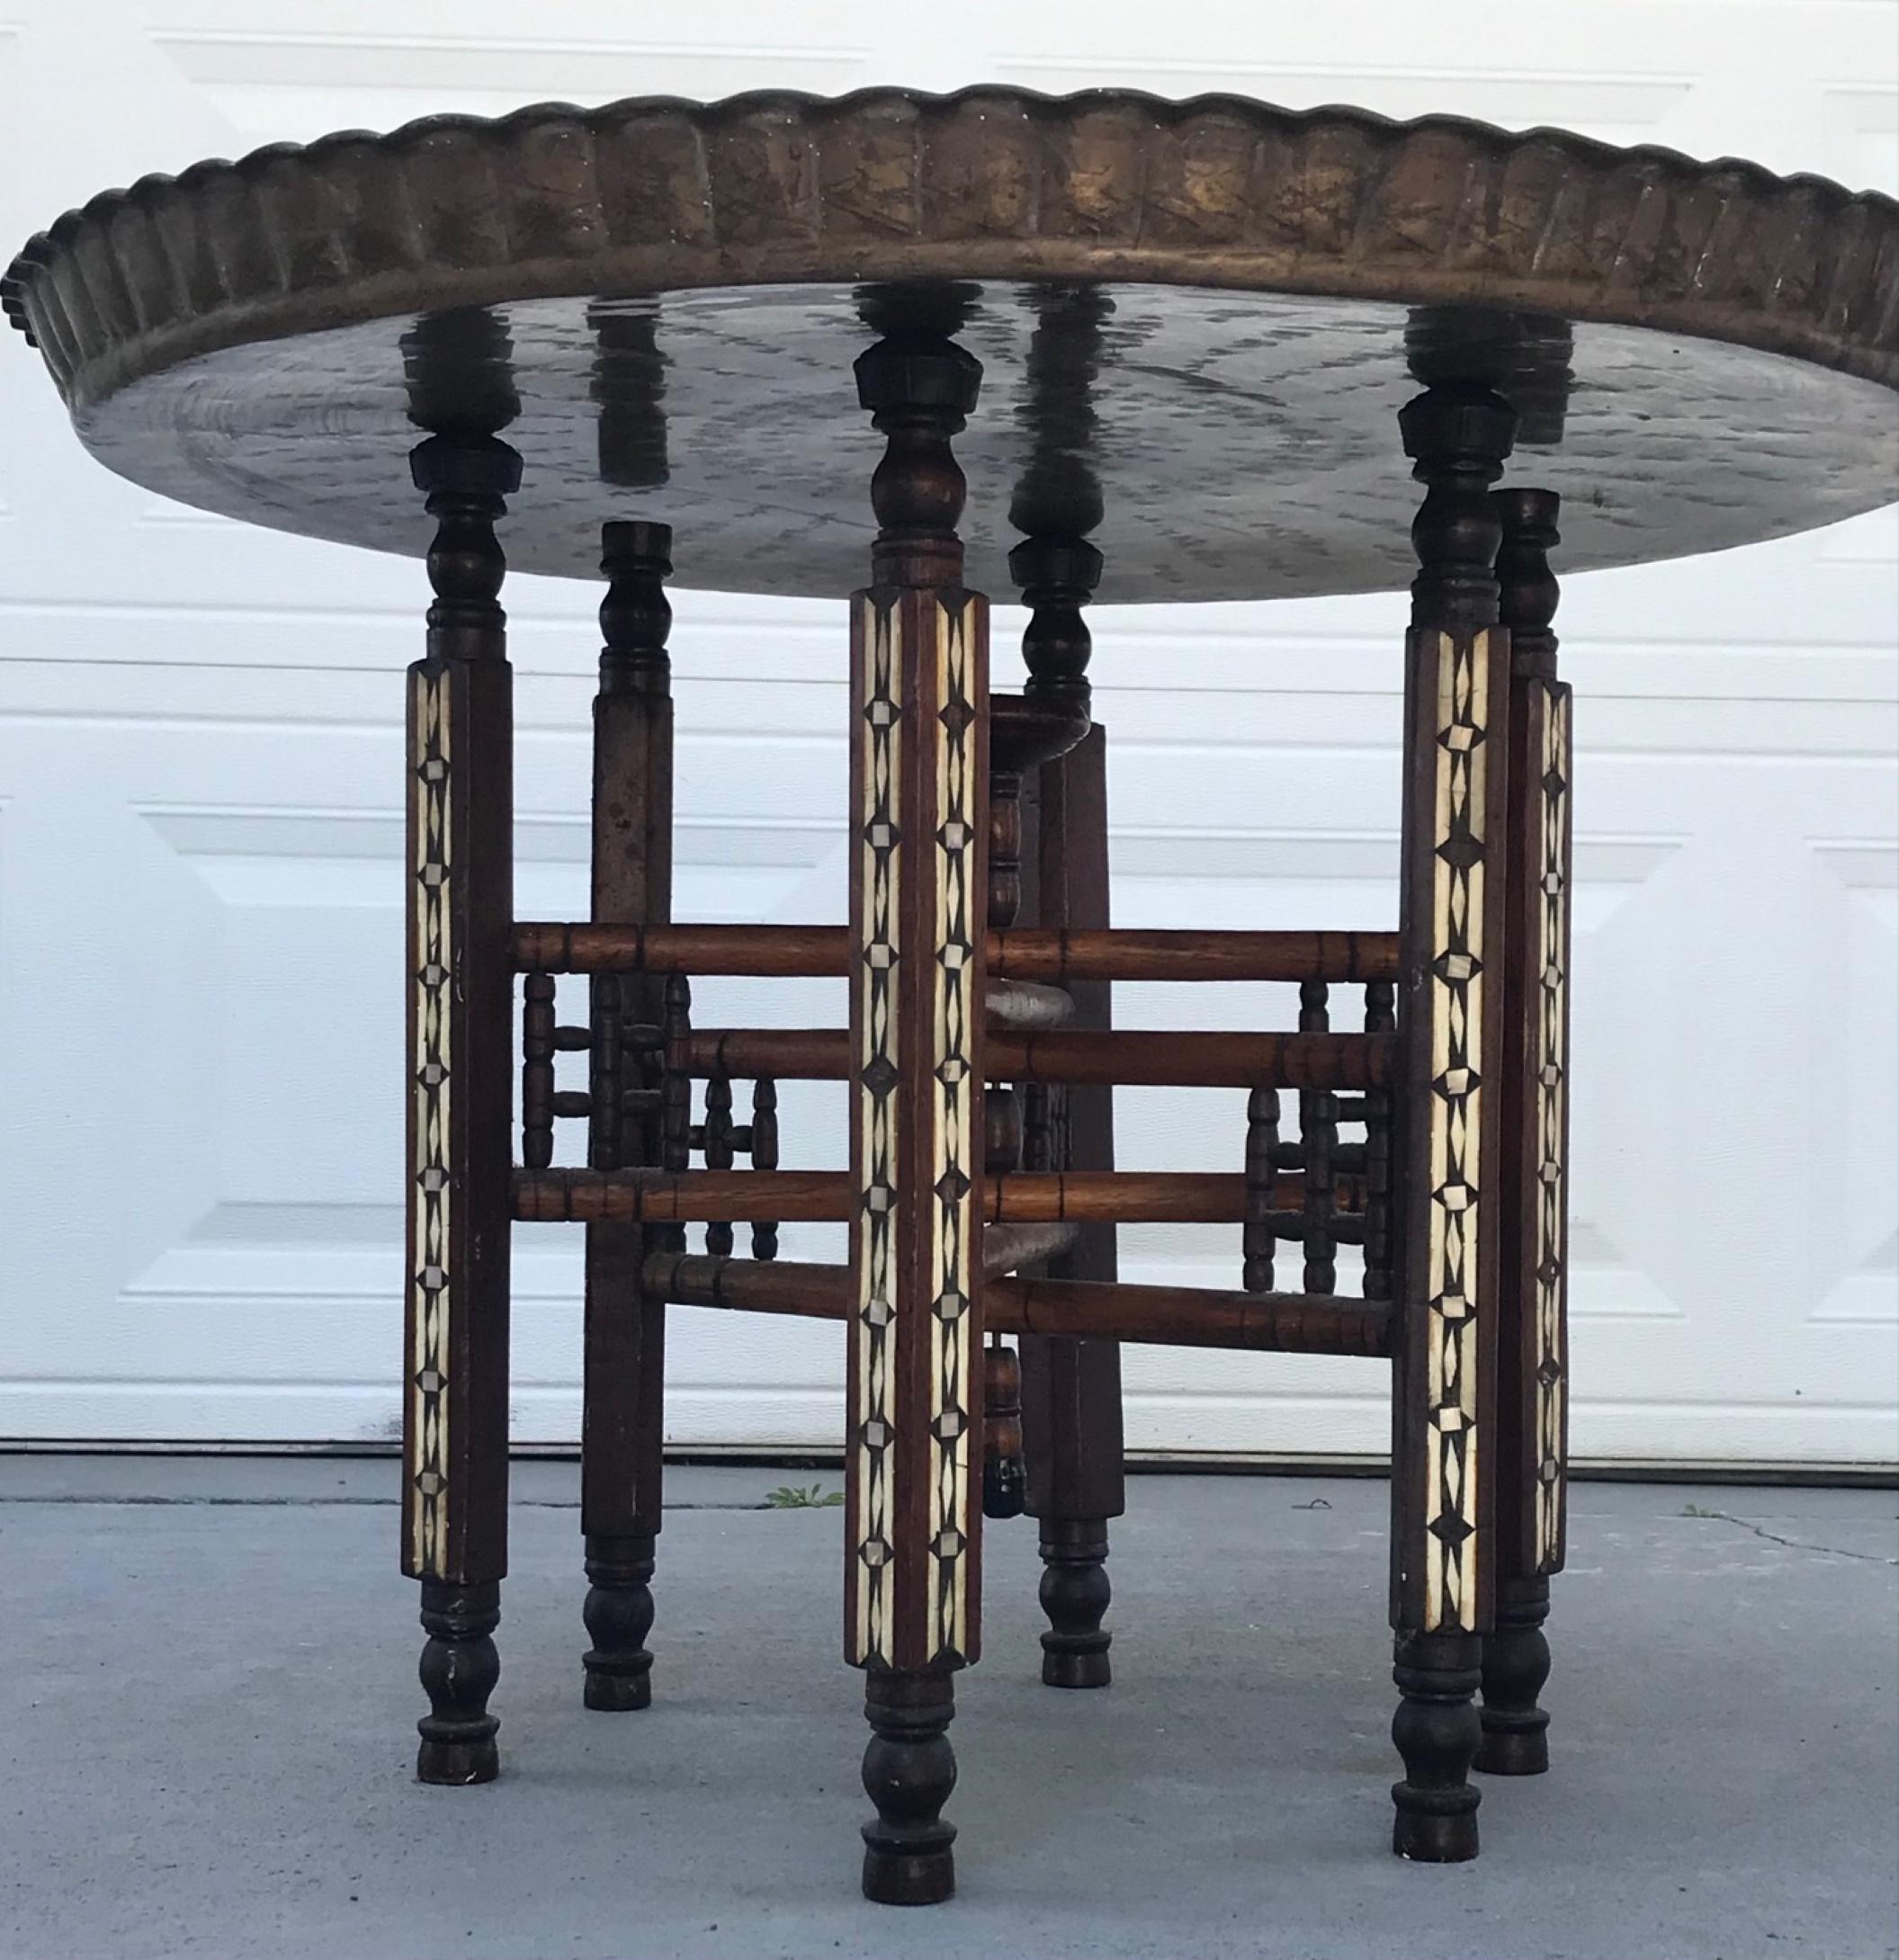 Moorish inlaid mother of pearl six legged brass tray top folding side table.

The inlay work makes this folding tray an exceptional handmade side table. An ebonized hand carved turned wood base of 6 legs is ornately inlaid with Arabic inspired